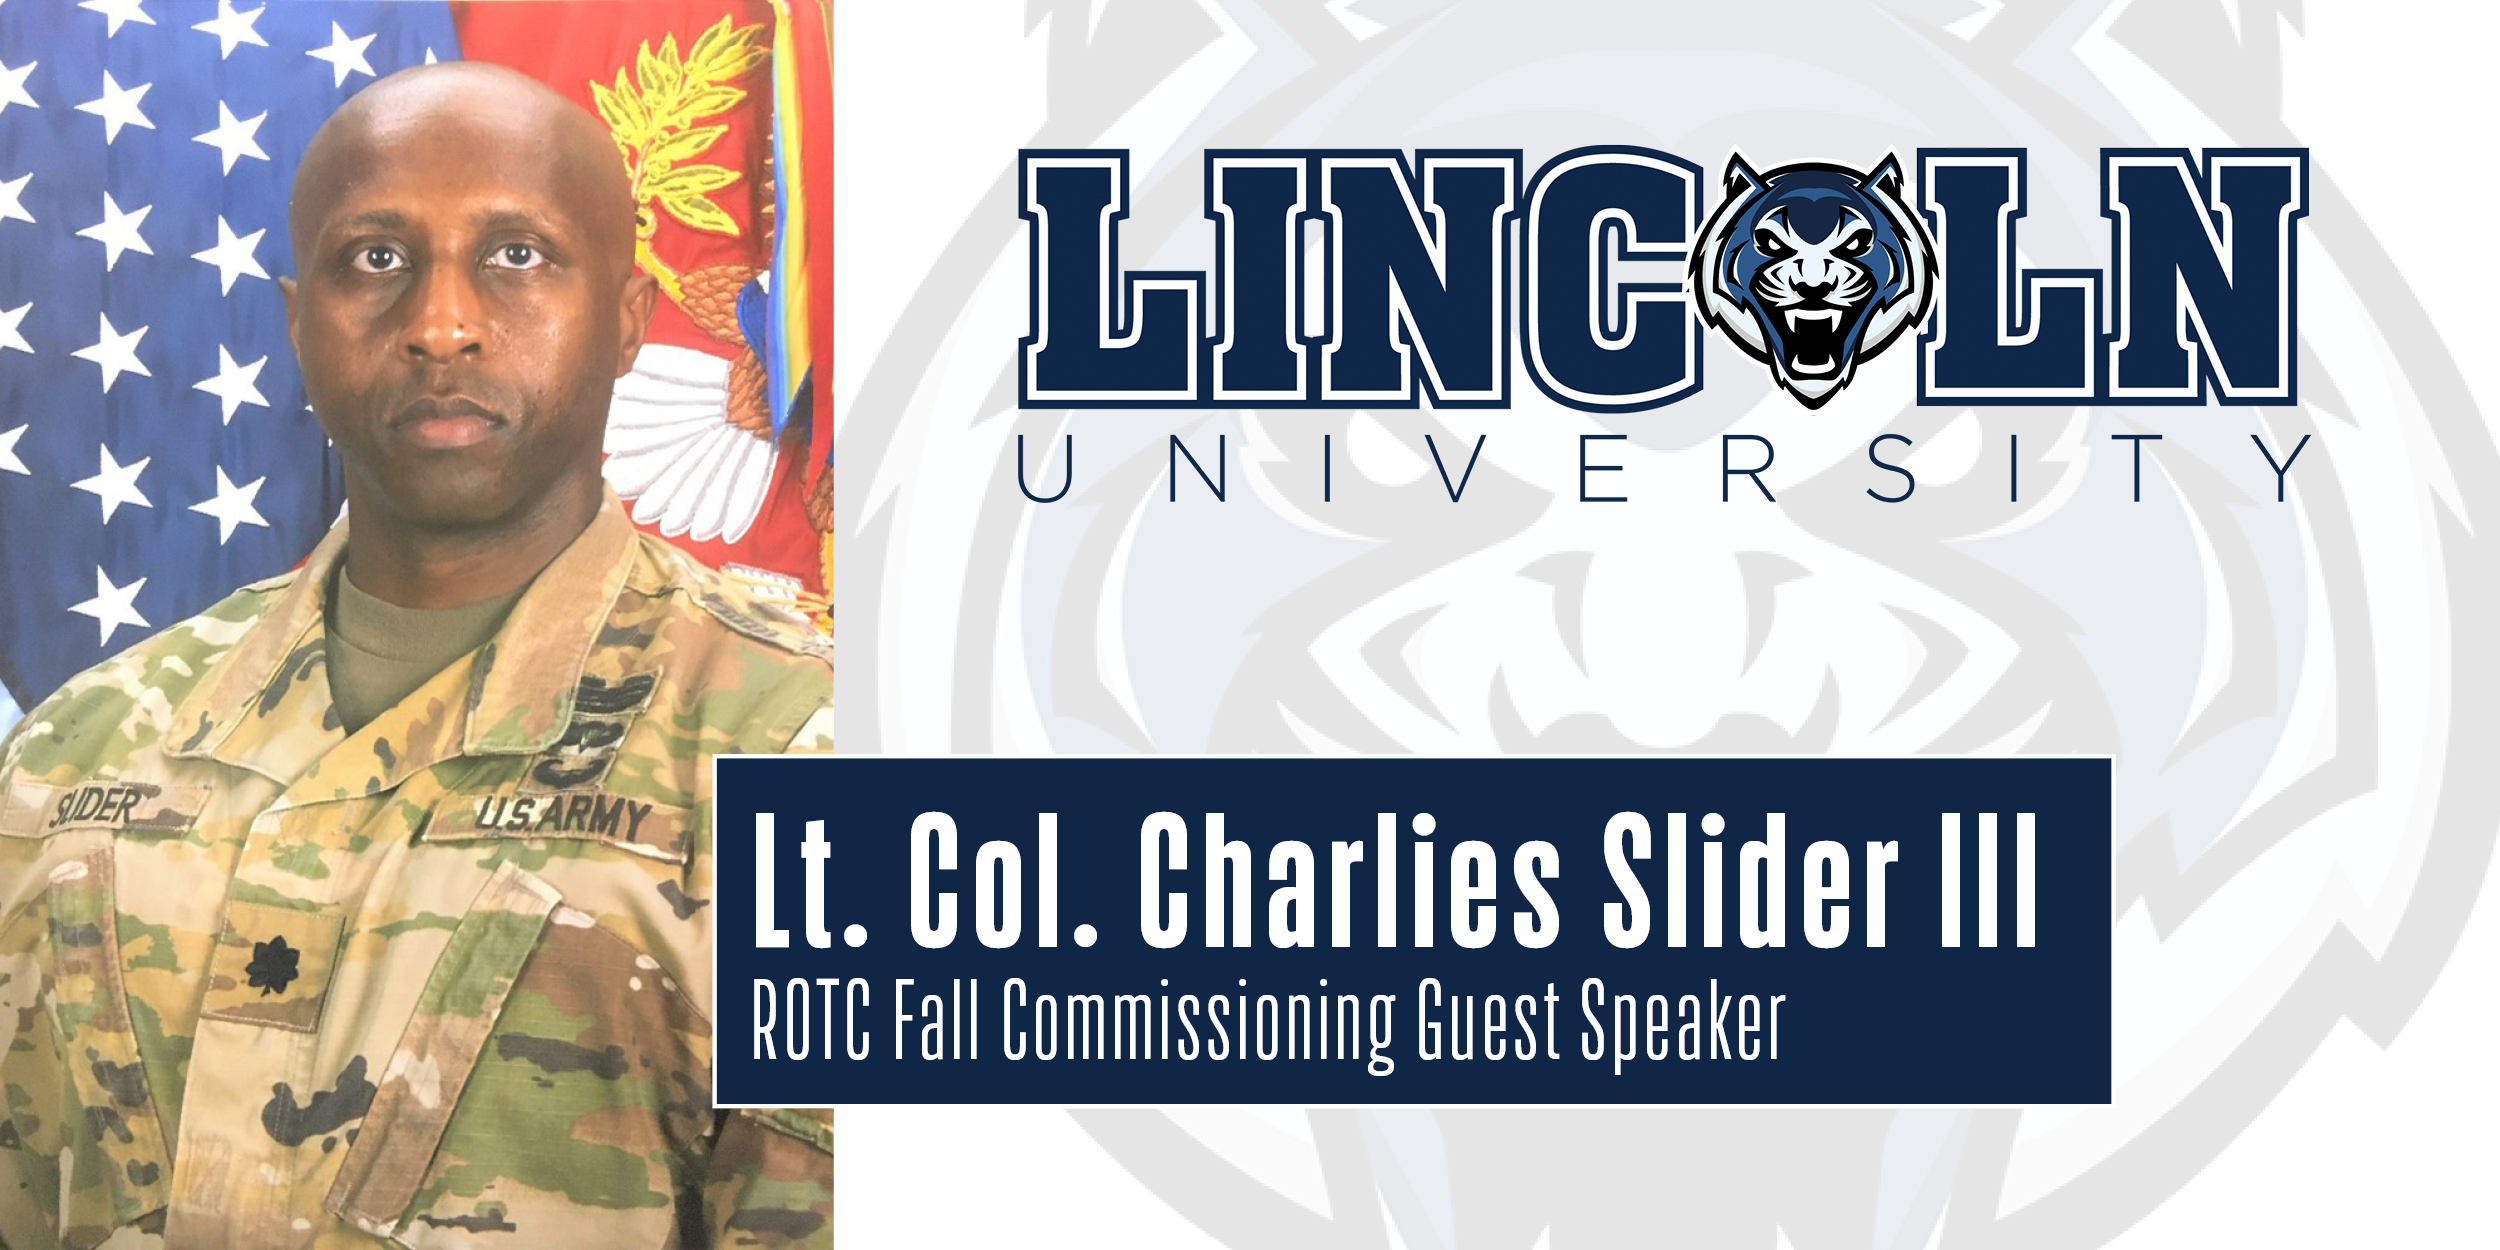 LU alumnus Lt. Col. Charlies Slider III will serve as guest speaker for the 2022 Fall Commissioning Ceremony. 